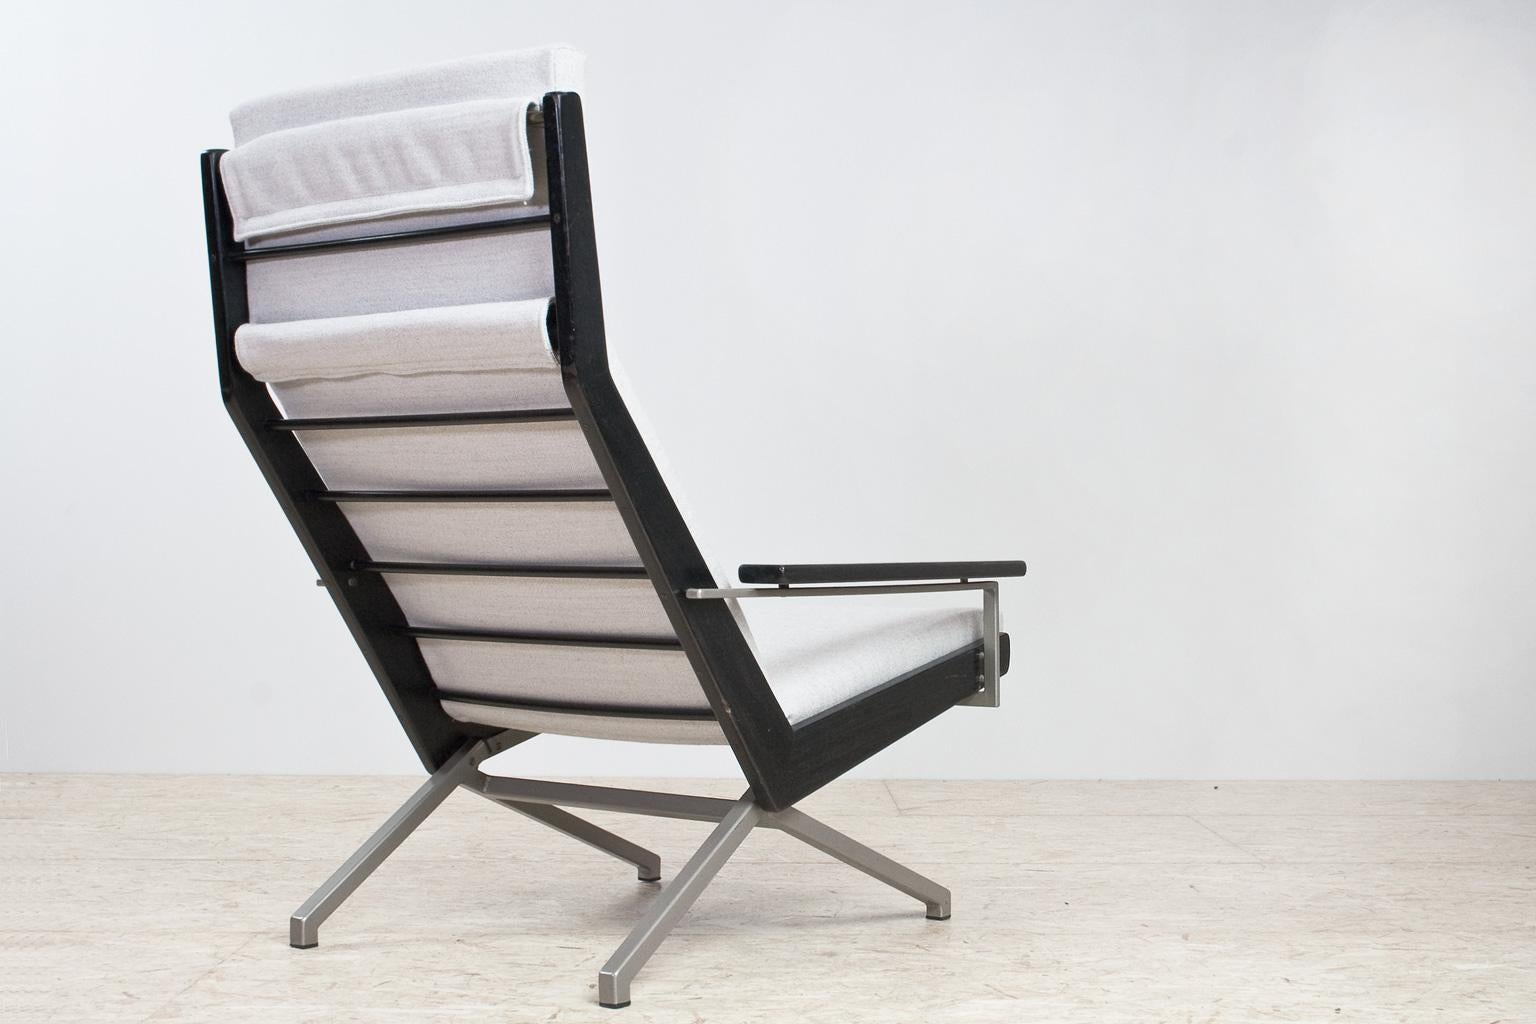 Mid-Century Modern Dutch Lotus lounge chair by Rob Parry, 1960s the Netherlands for Gelderland De Ster. Elegant, high back and Scandinavian style armchair, seating placed on a grey lacquered pyramide foot. The cushion is completely new and